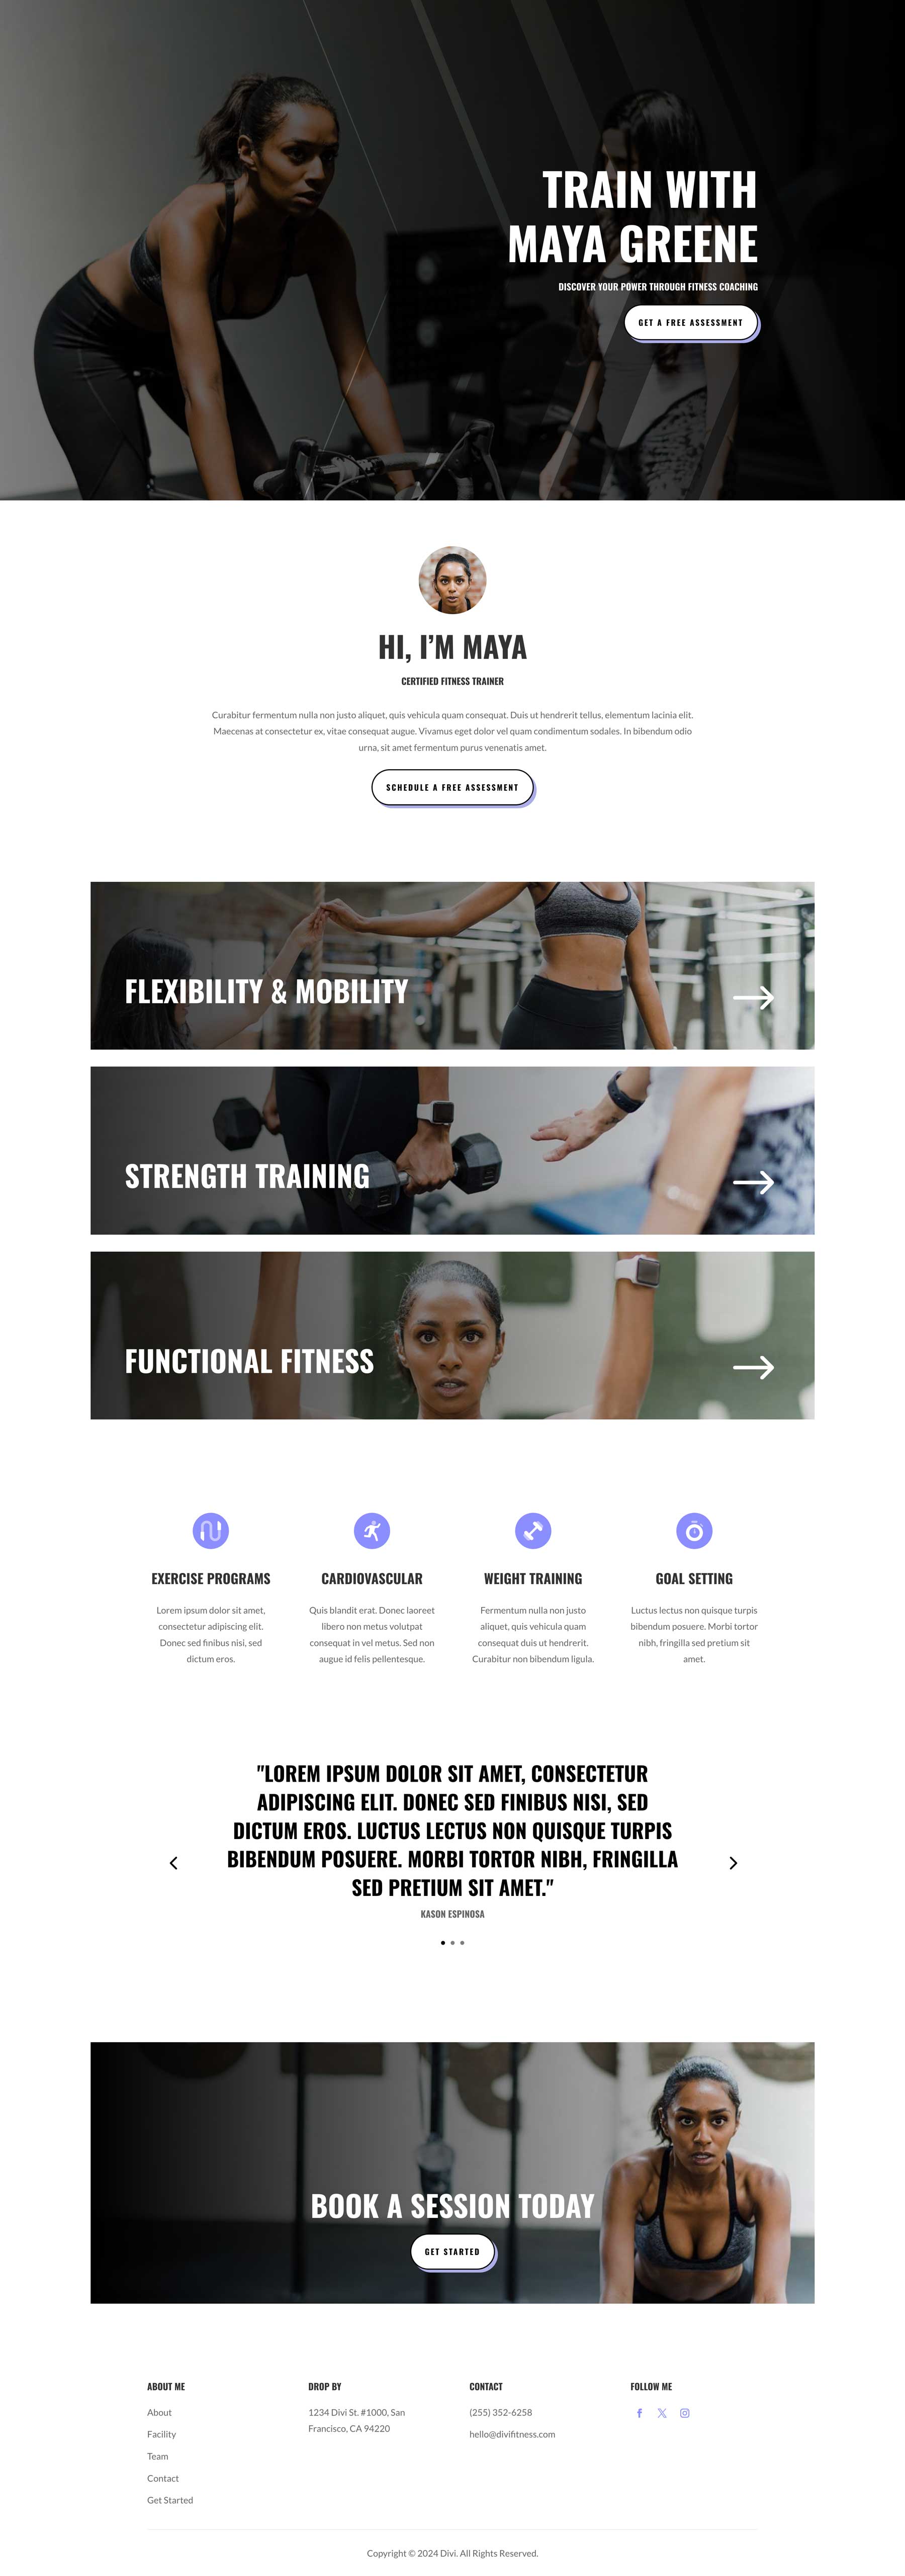 Fitness Trainer Layout Pack for Divi